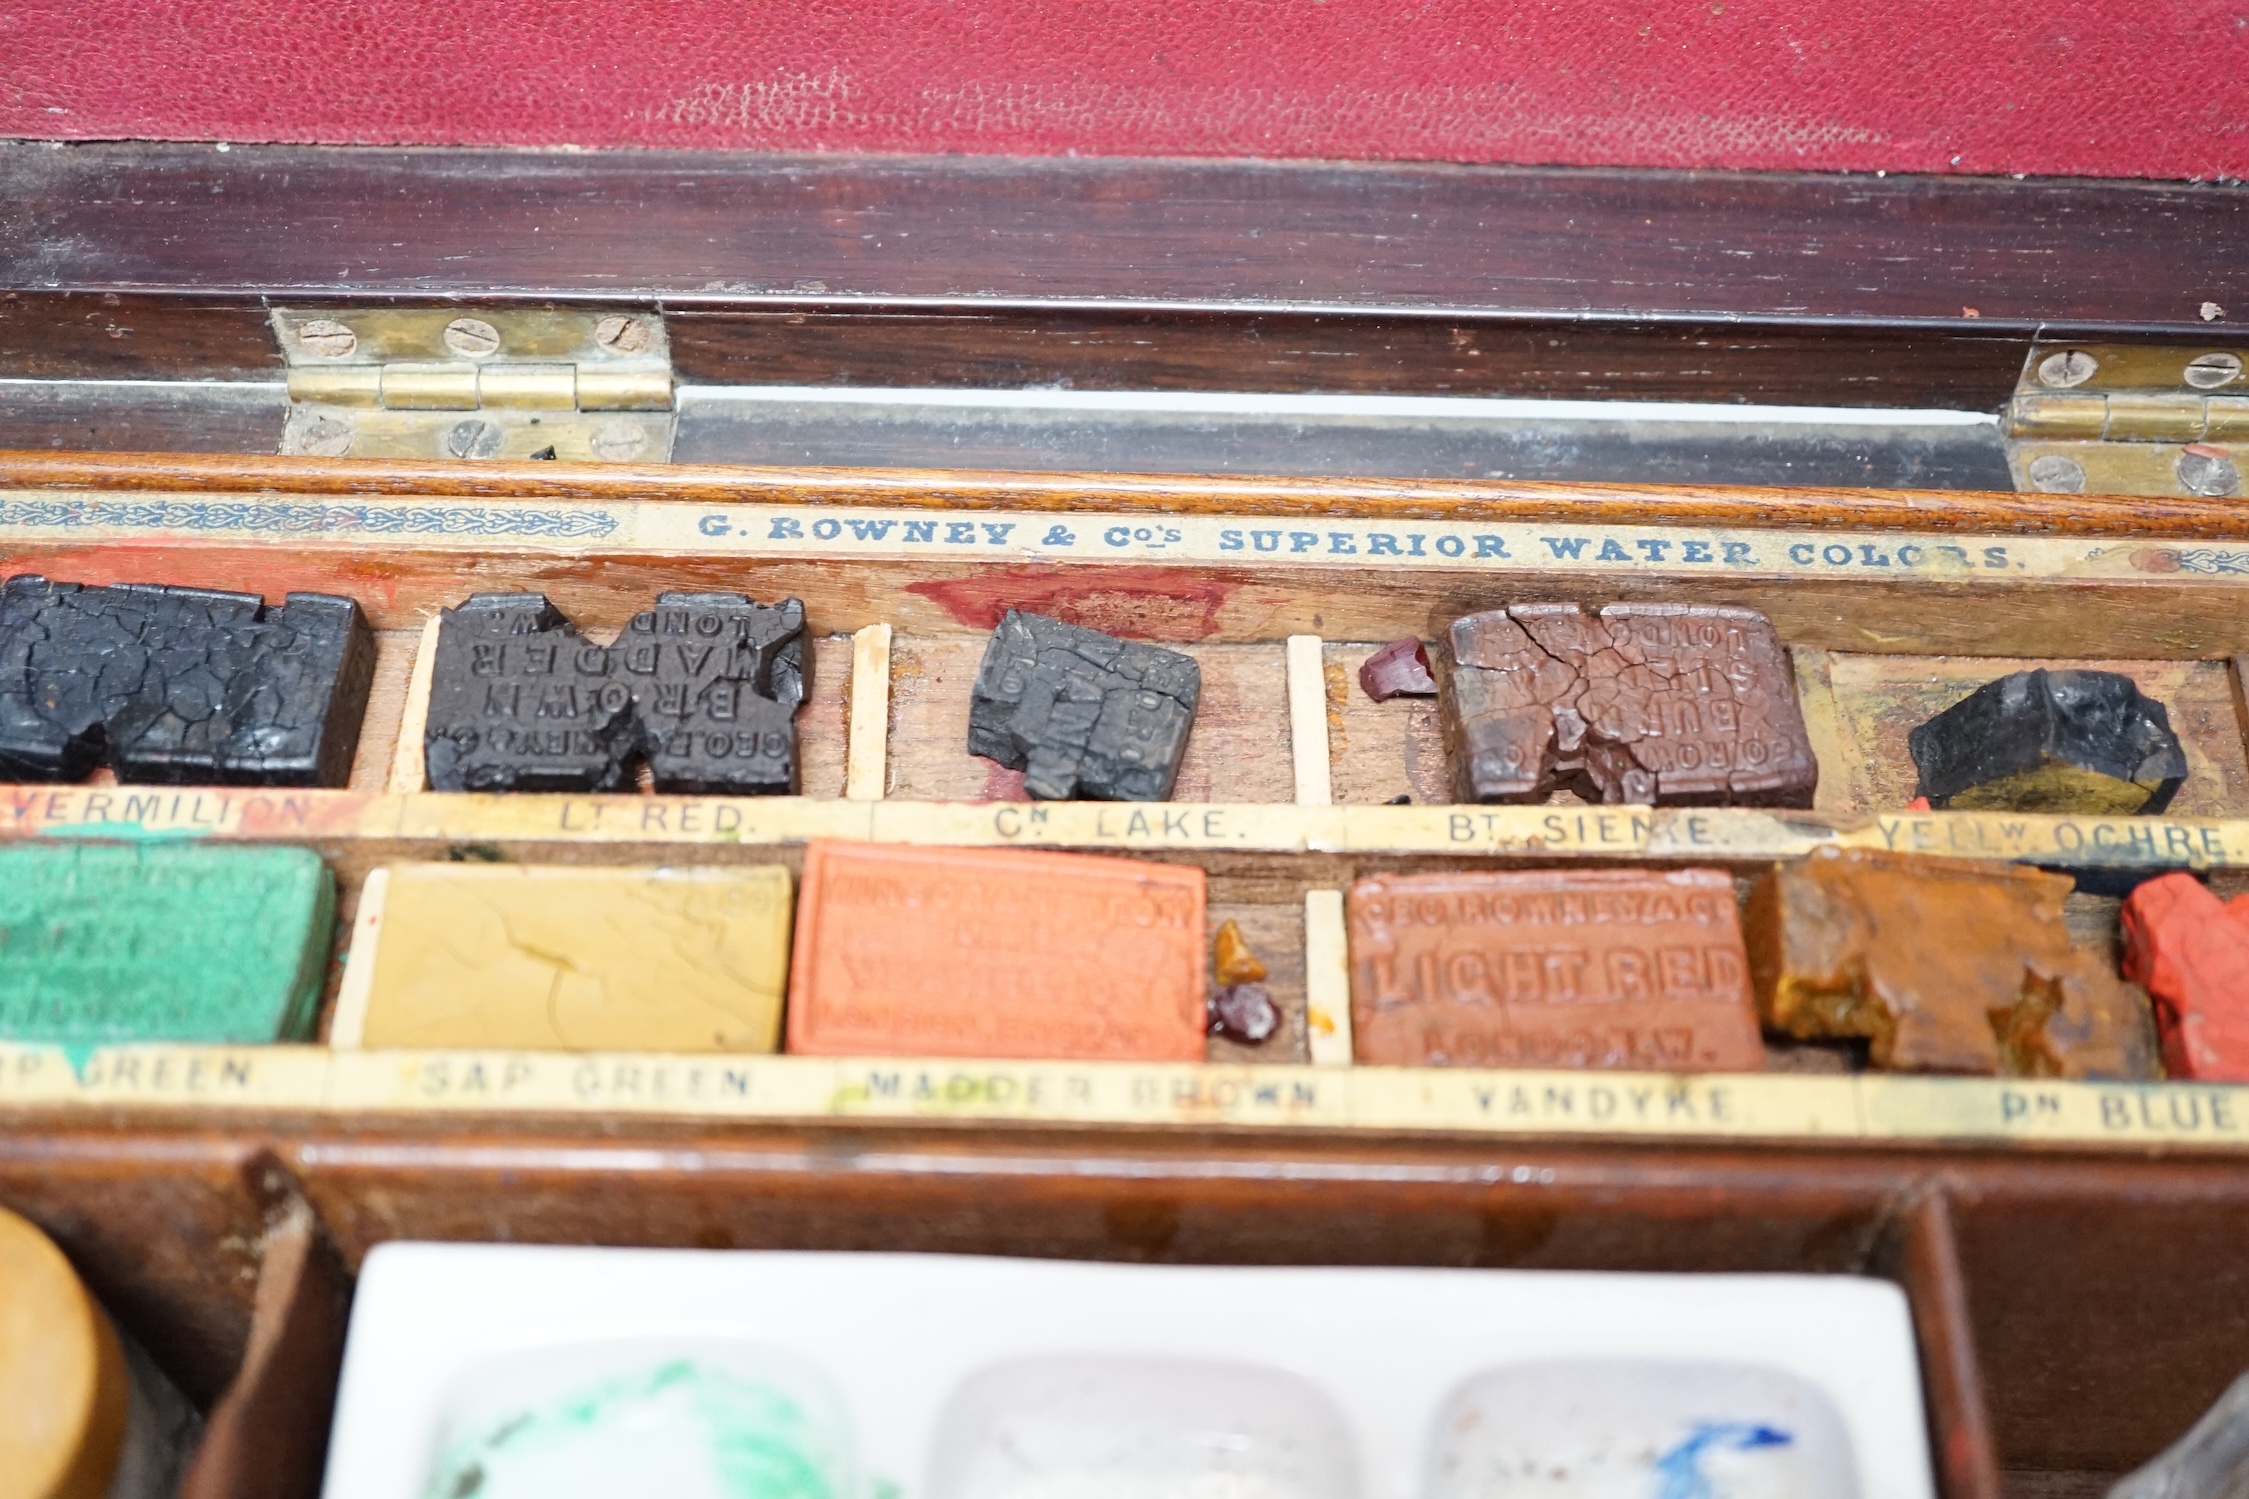 An Edwardian G Rowney & Co brass mounted artist’s paint box with watercolour blocks, tubes and charcoal sticks